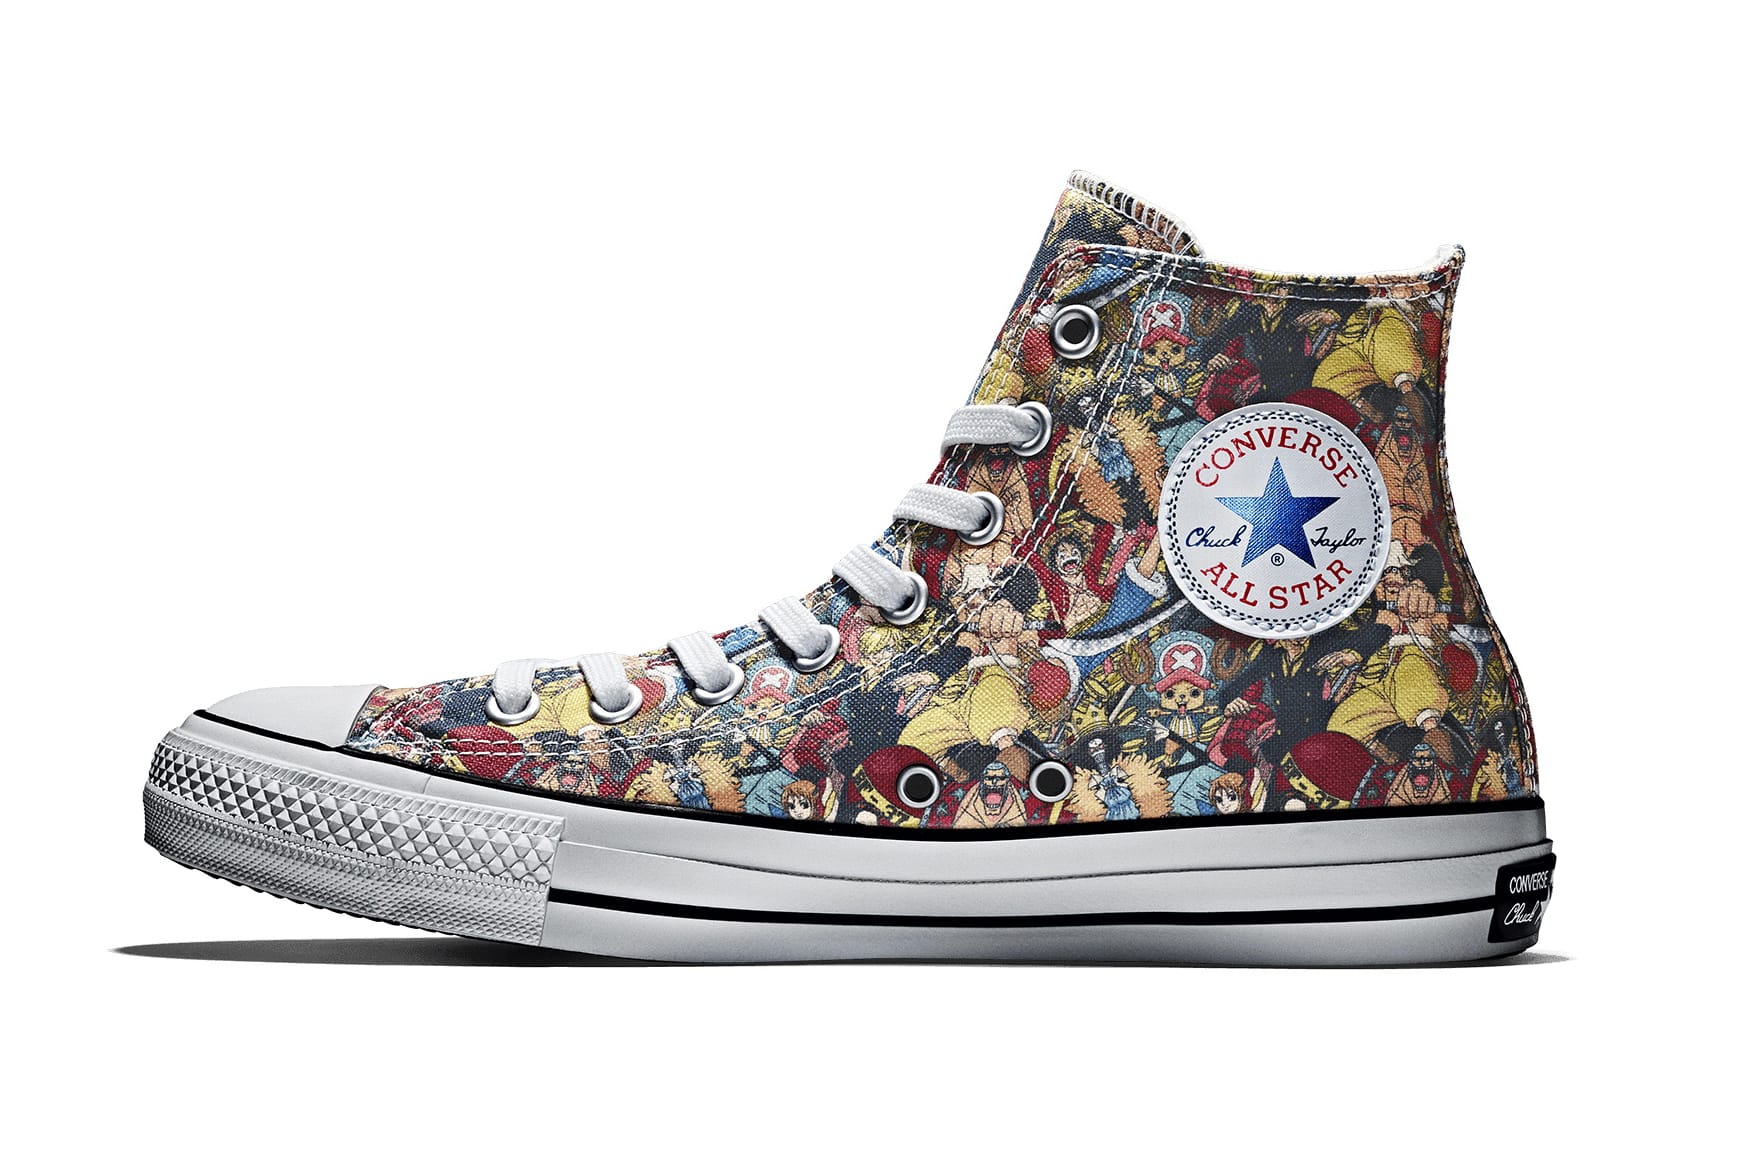 One Piece' x Converse All Star 100 